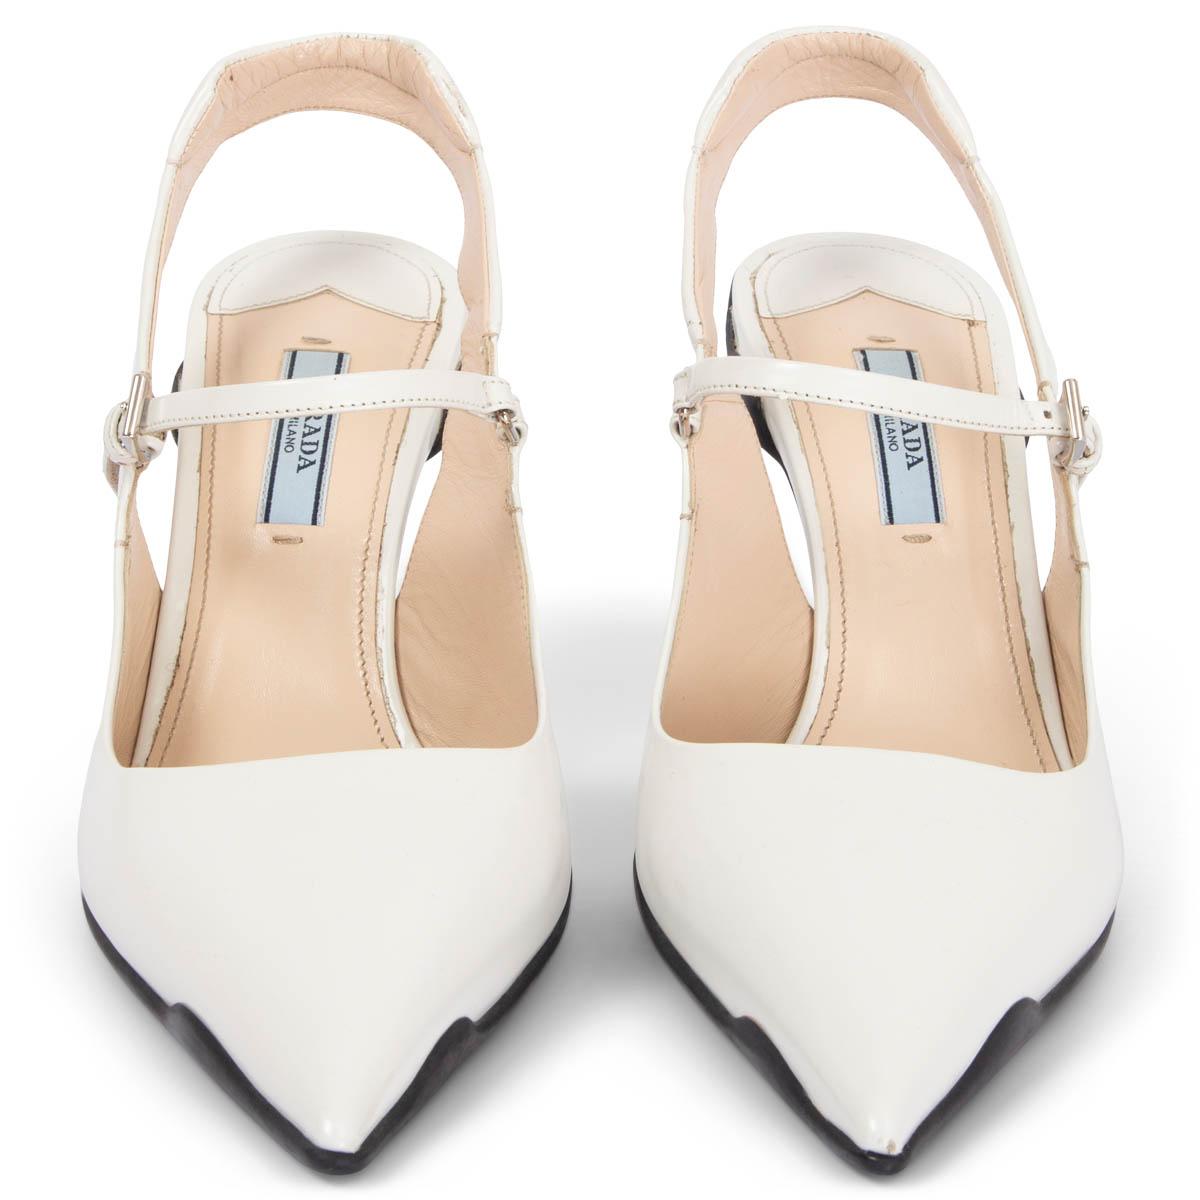 100% authentic Prada pointed-toe slingbacks in white smooth leather featuring instep strap and black rubber sole. Have been worn worn once or twice and are in virtually new condition. Come with dust bag. 

2019 Resort

Measurements
Imprinted